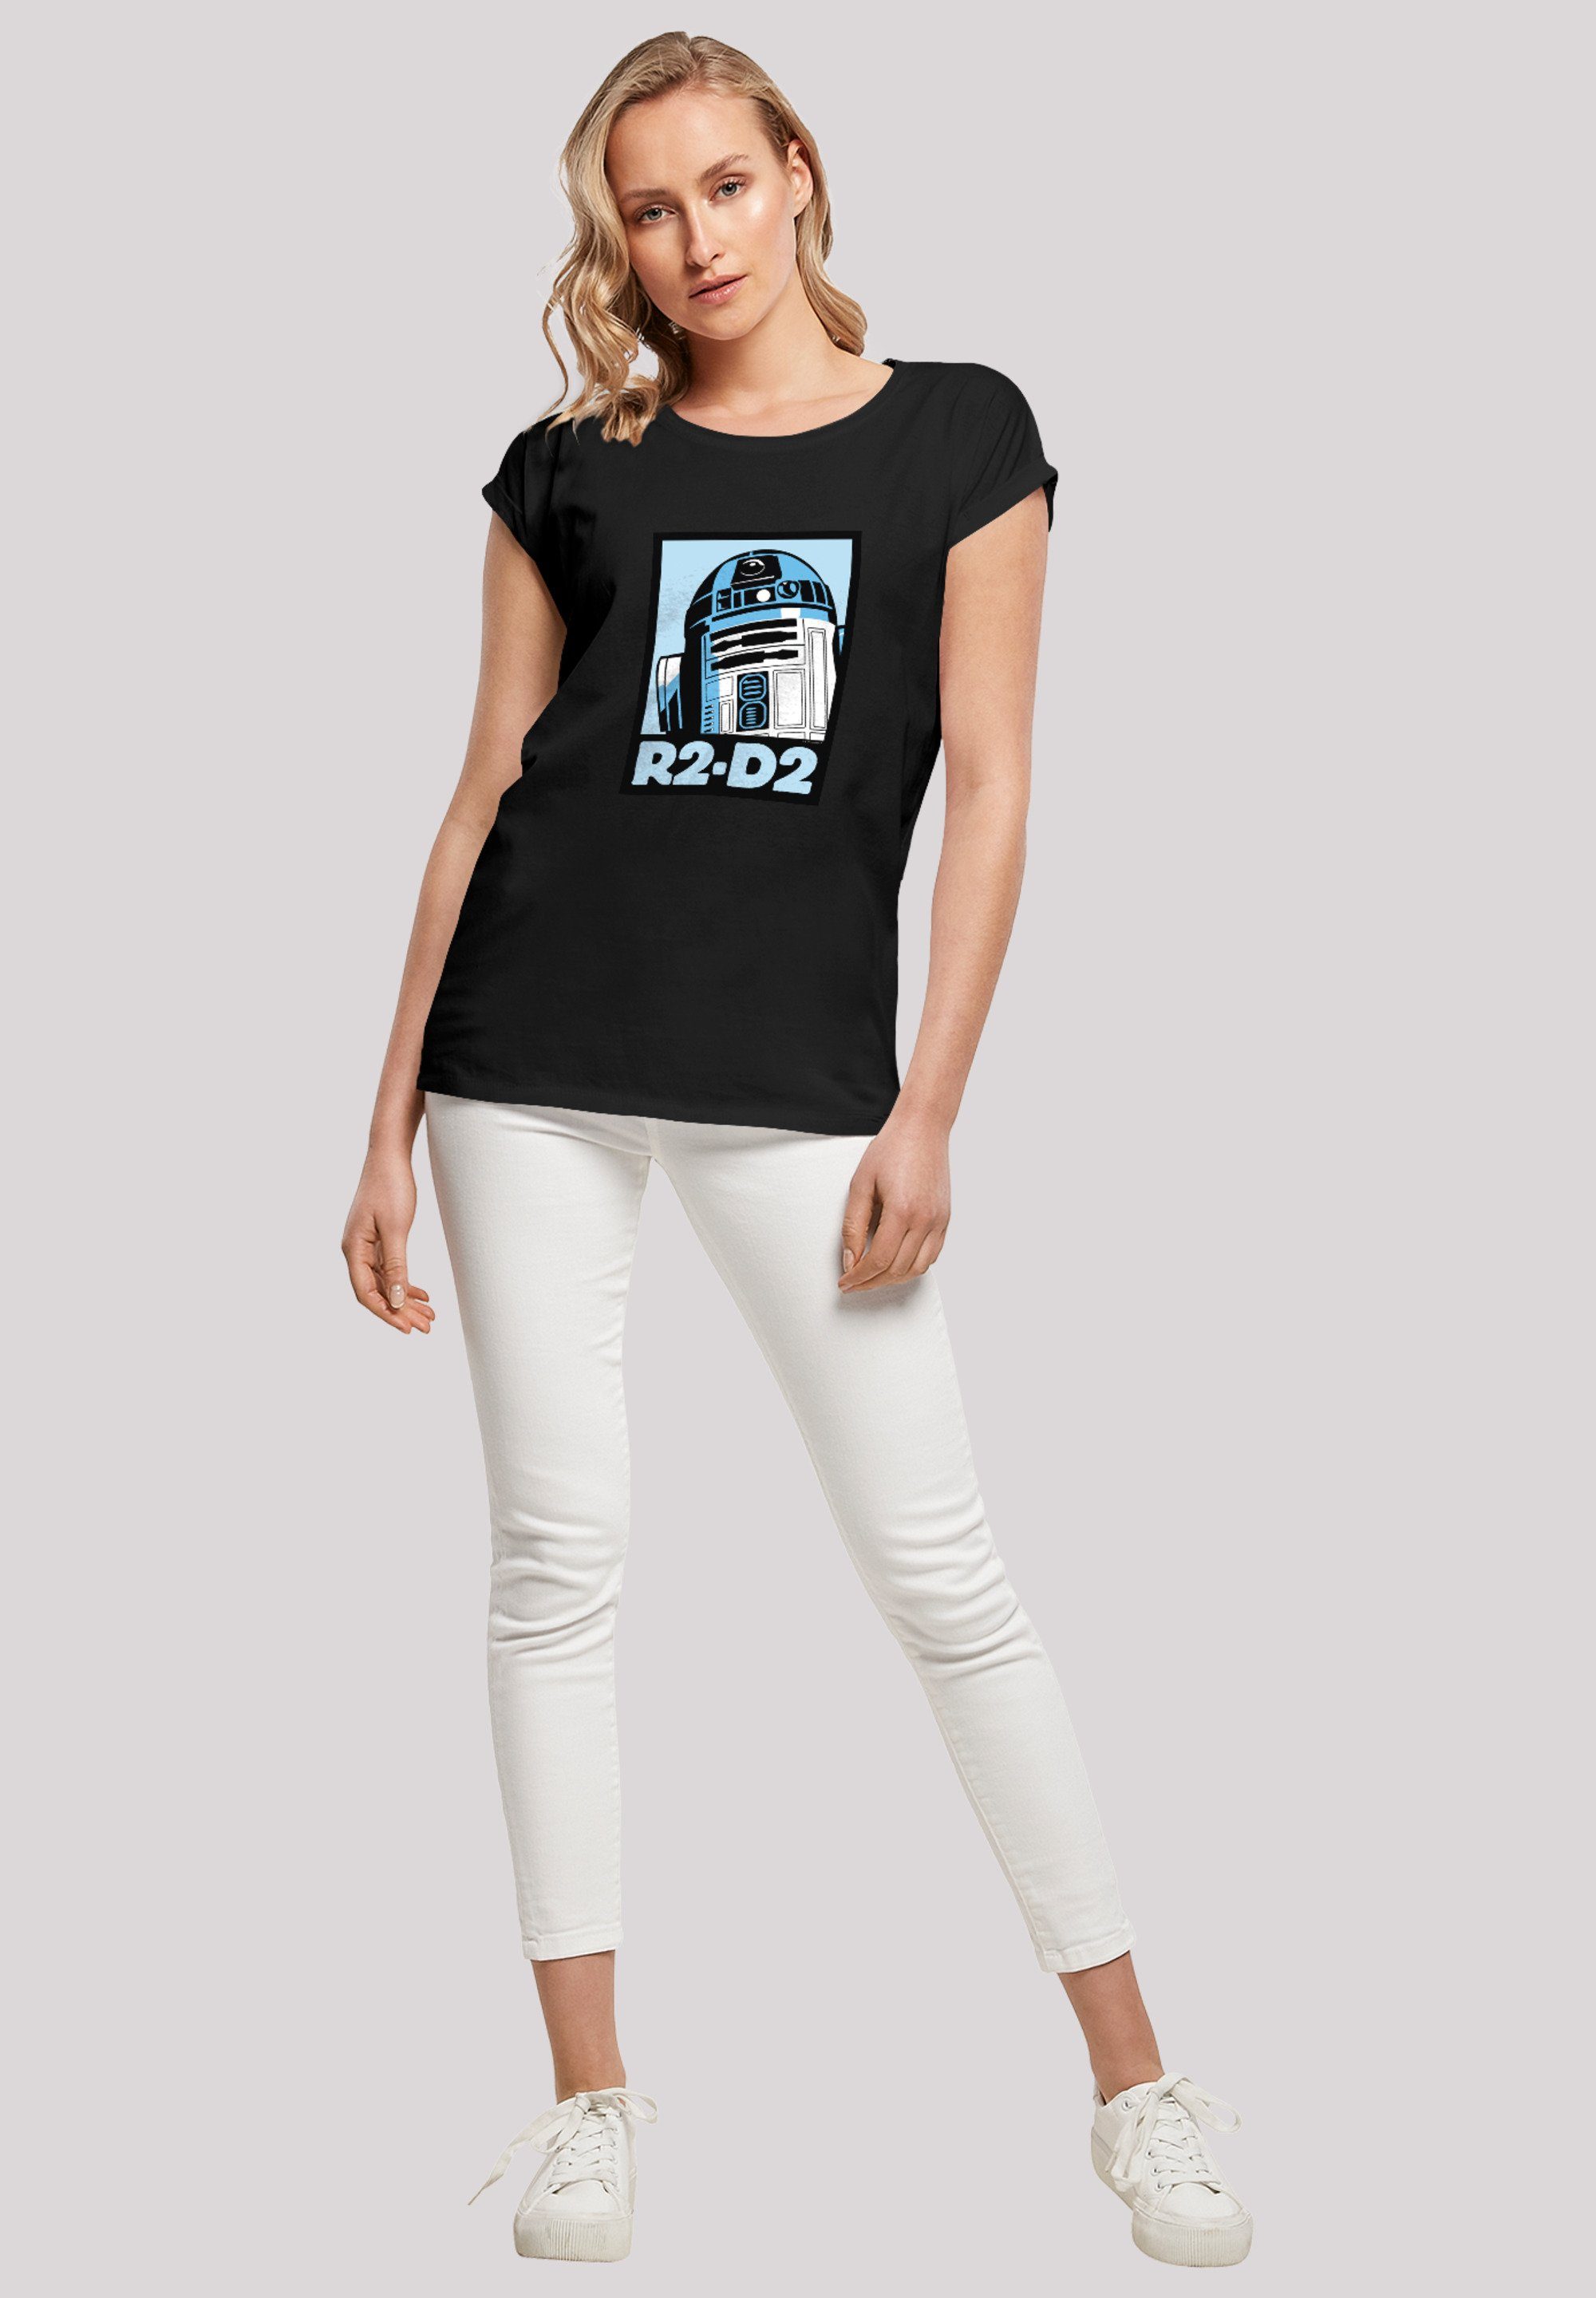 Ladies Wars with F4NT4STIC R2-D2 Star Kurzarmshirt Shoulder (1-tlg) Damen Tee Poster Extended